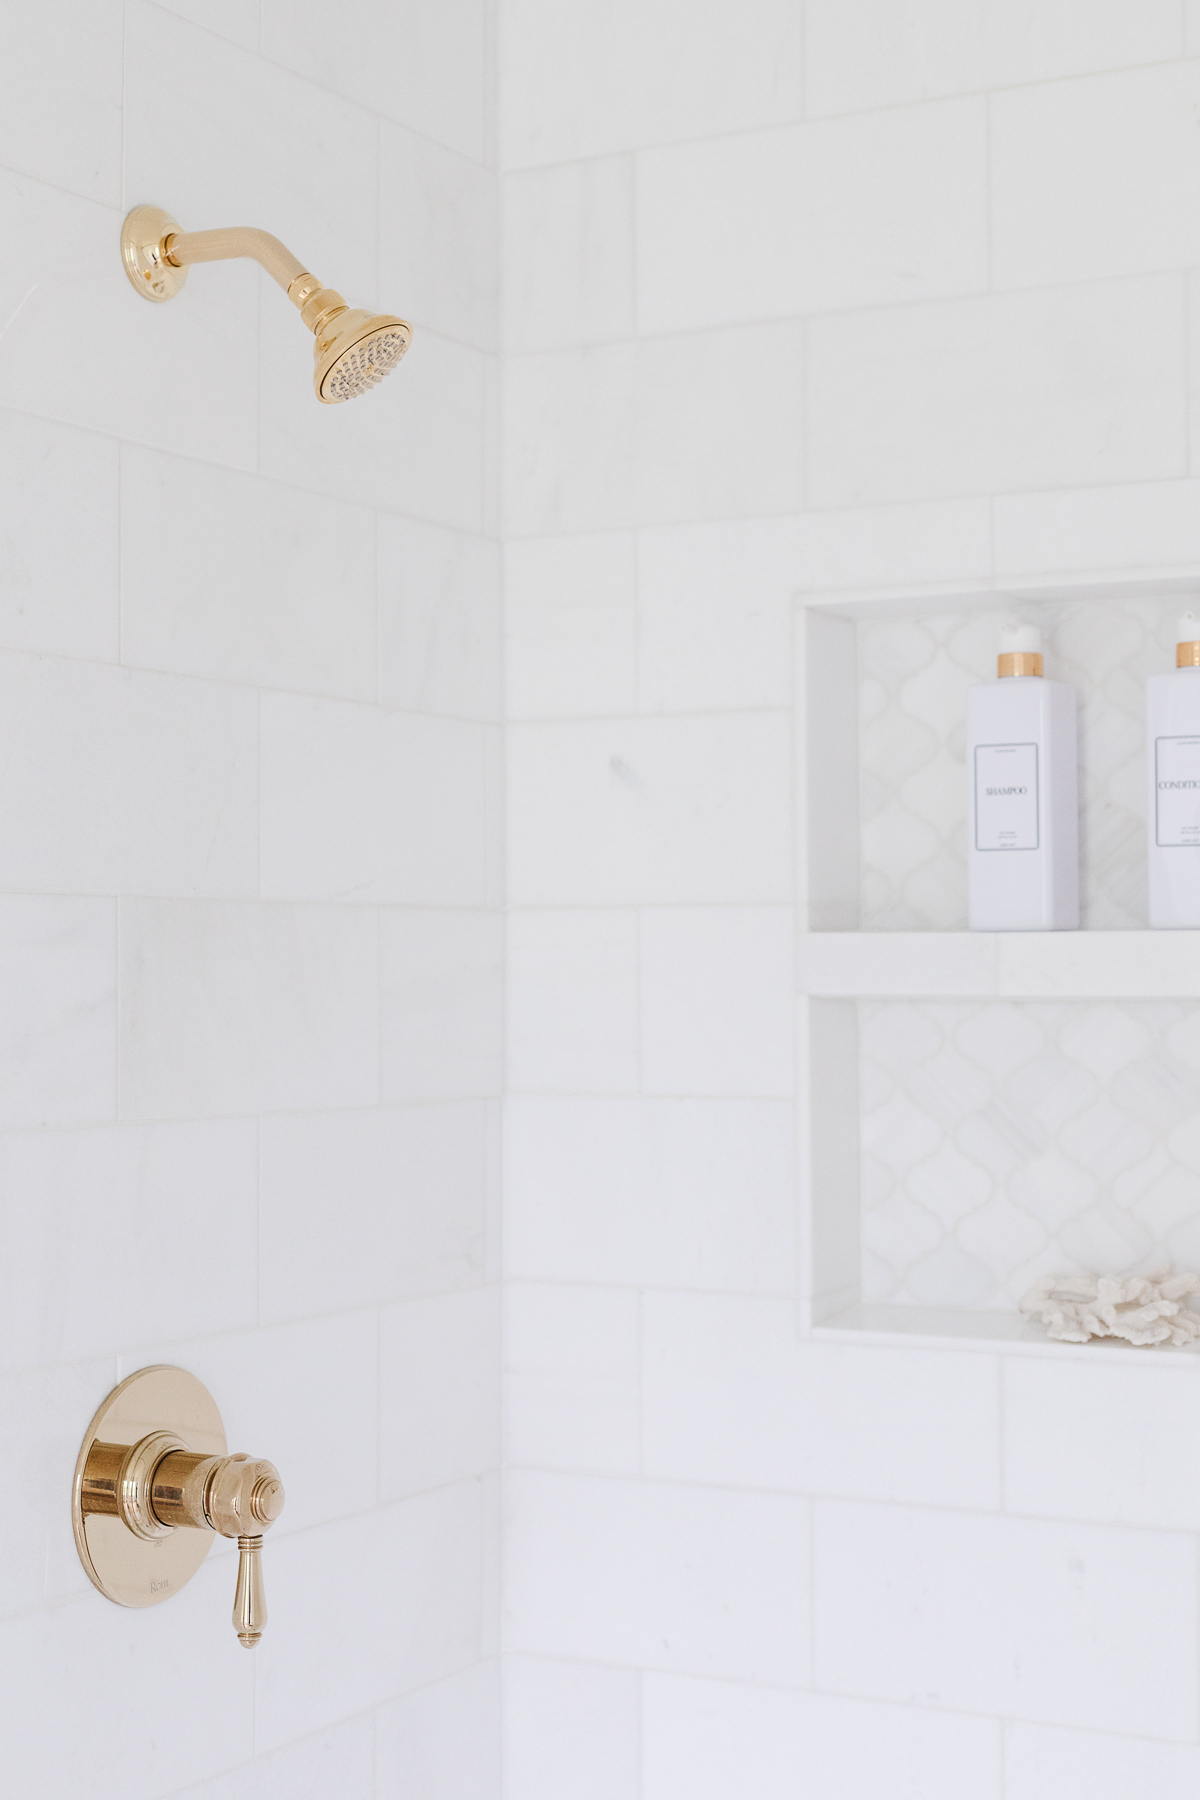 A white bathroom with a gold shower head and shelves.